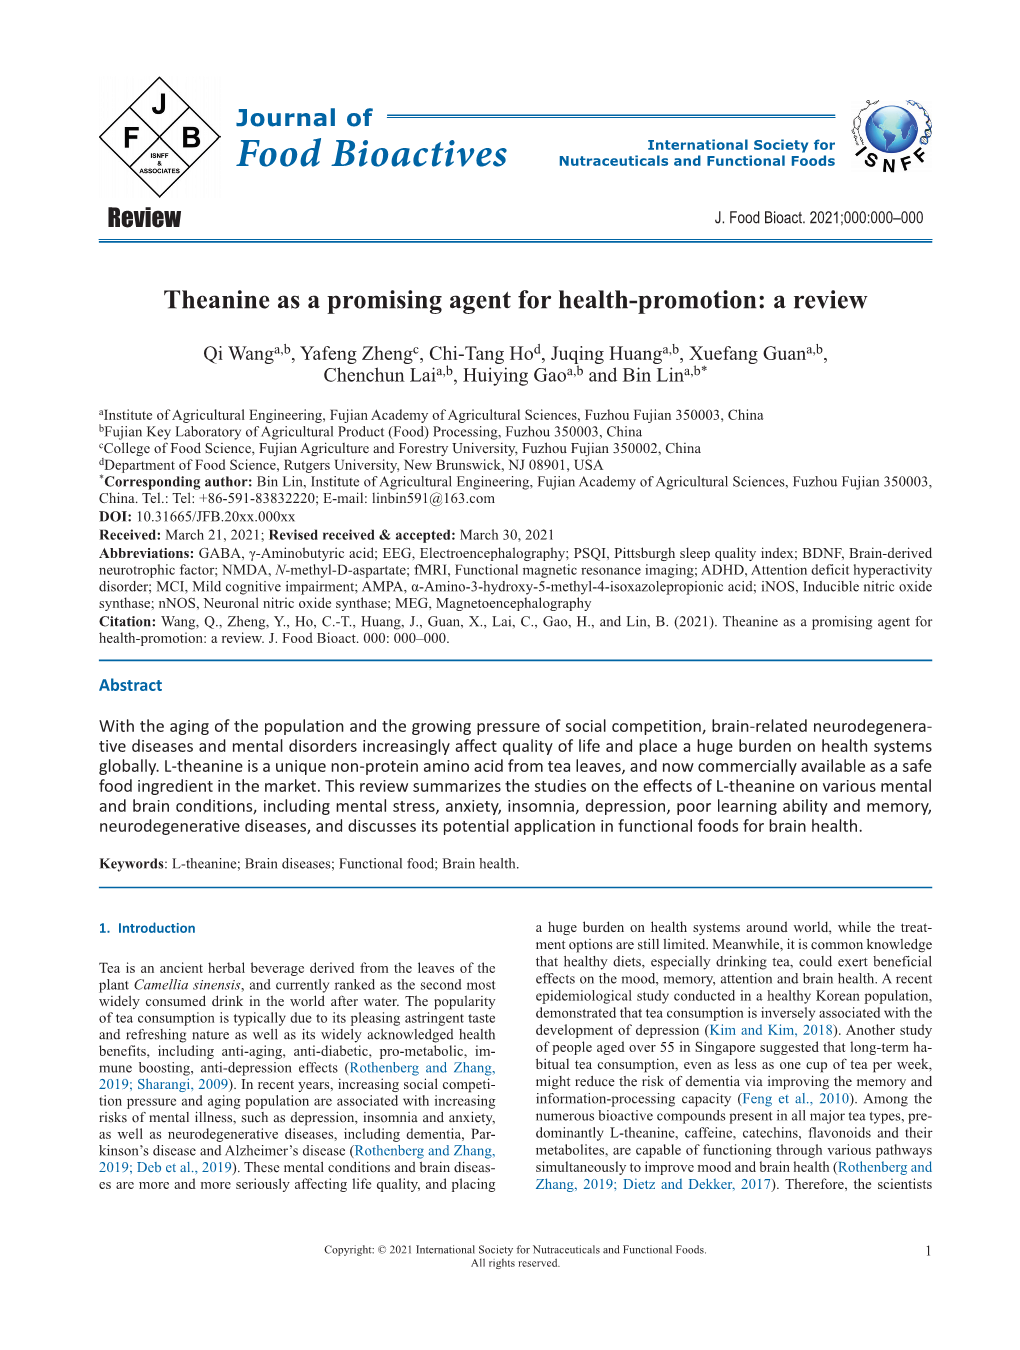 Theanine As a Promising Agent for Health-Promotion: a Review